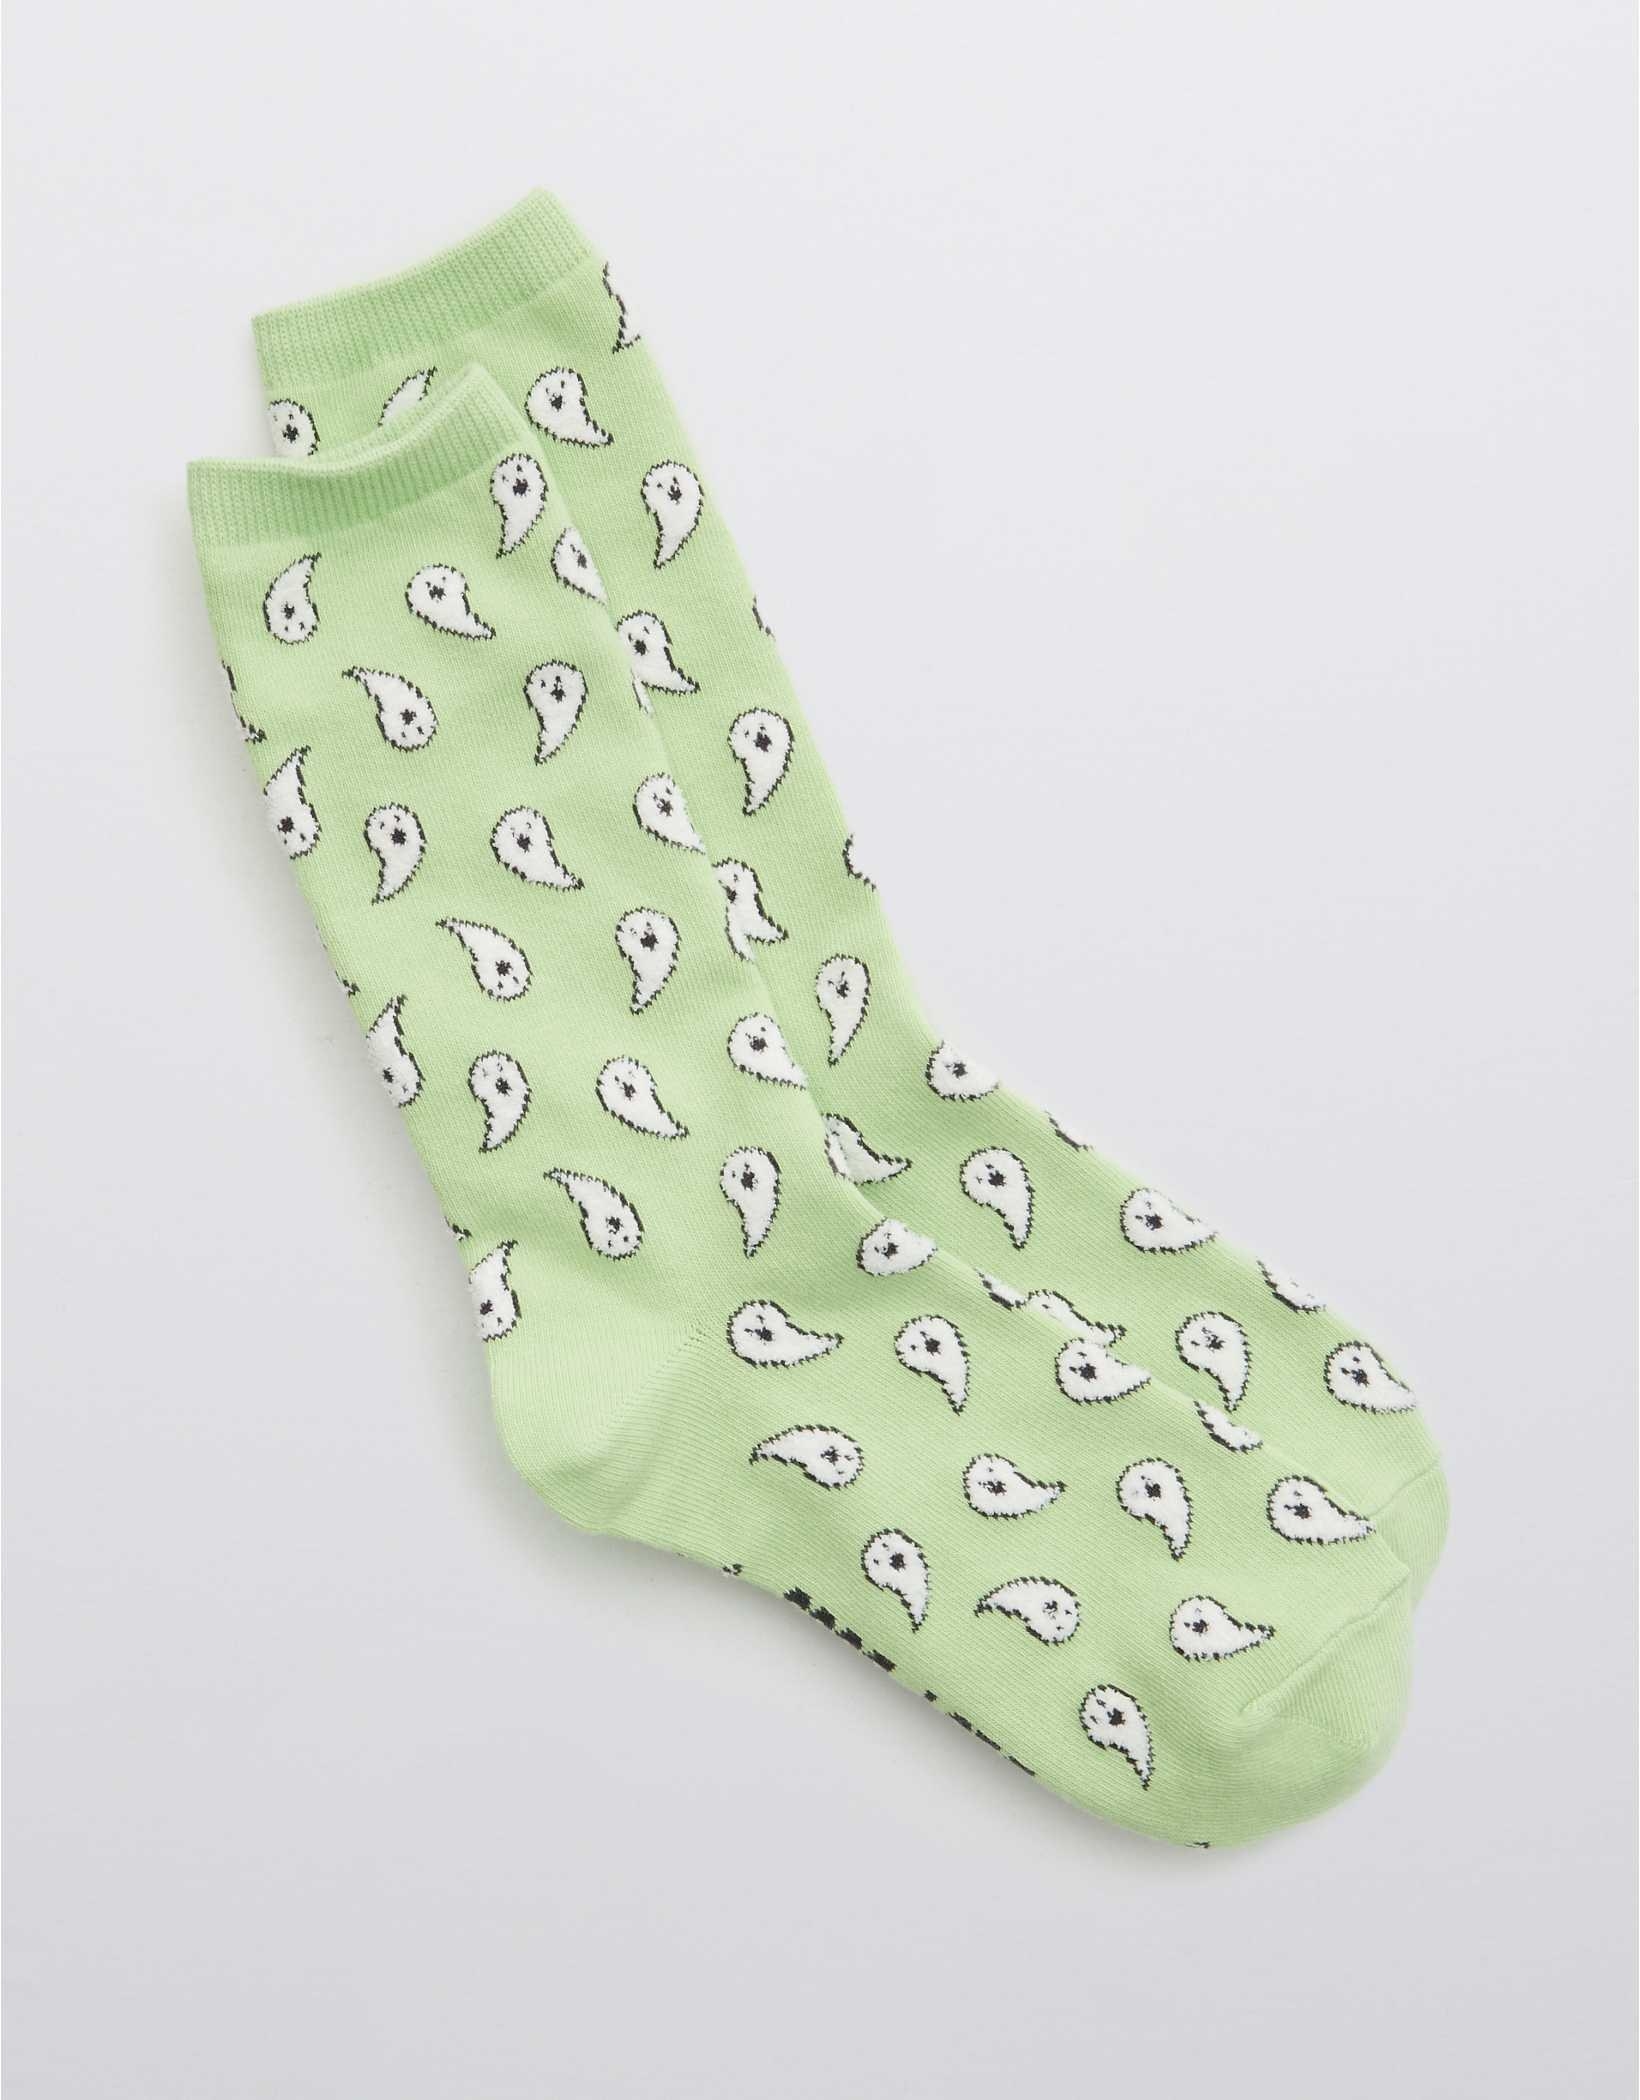 the mint green socks with white ghosts on them